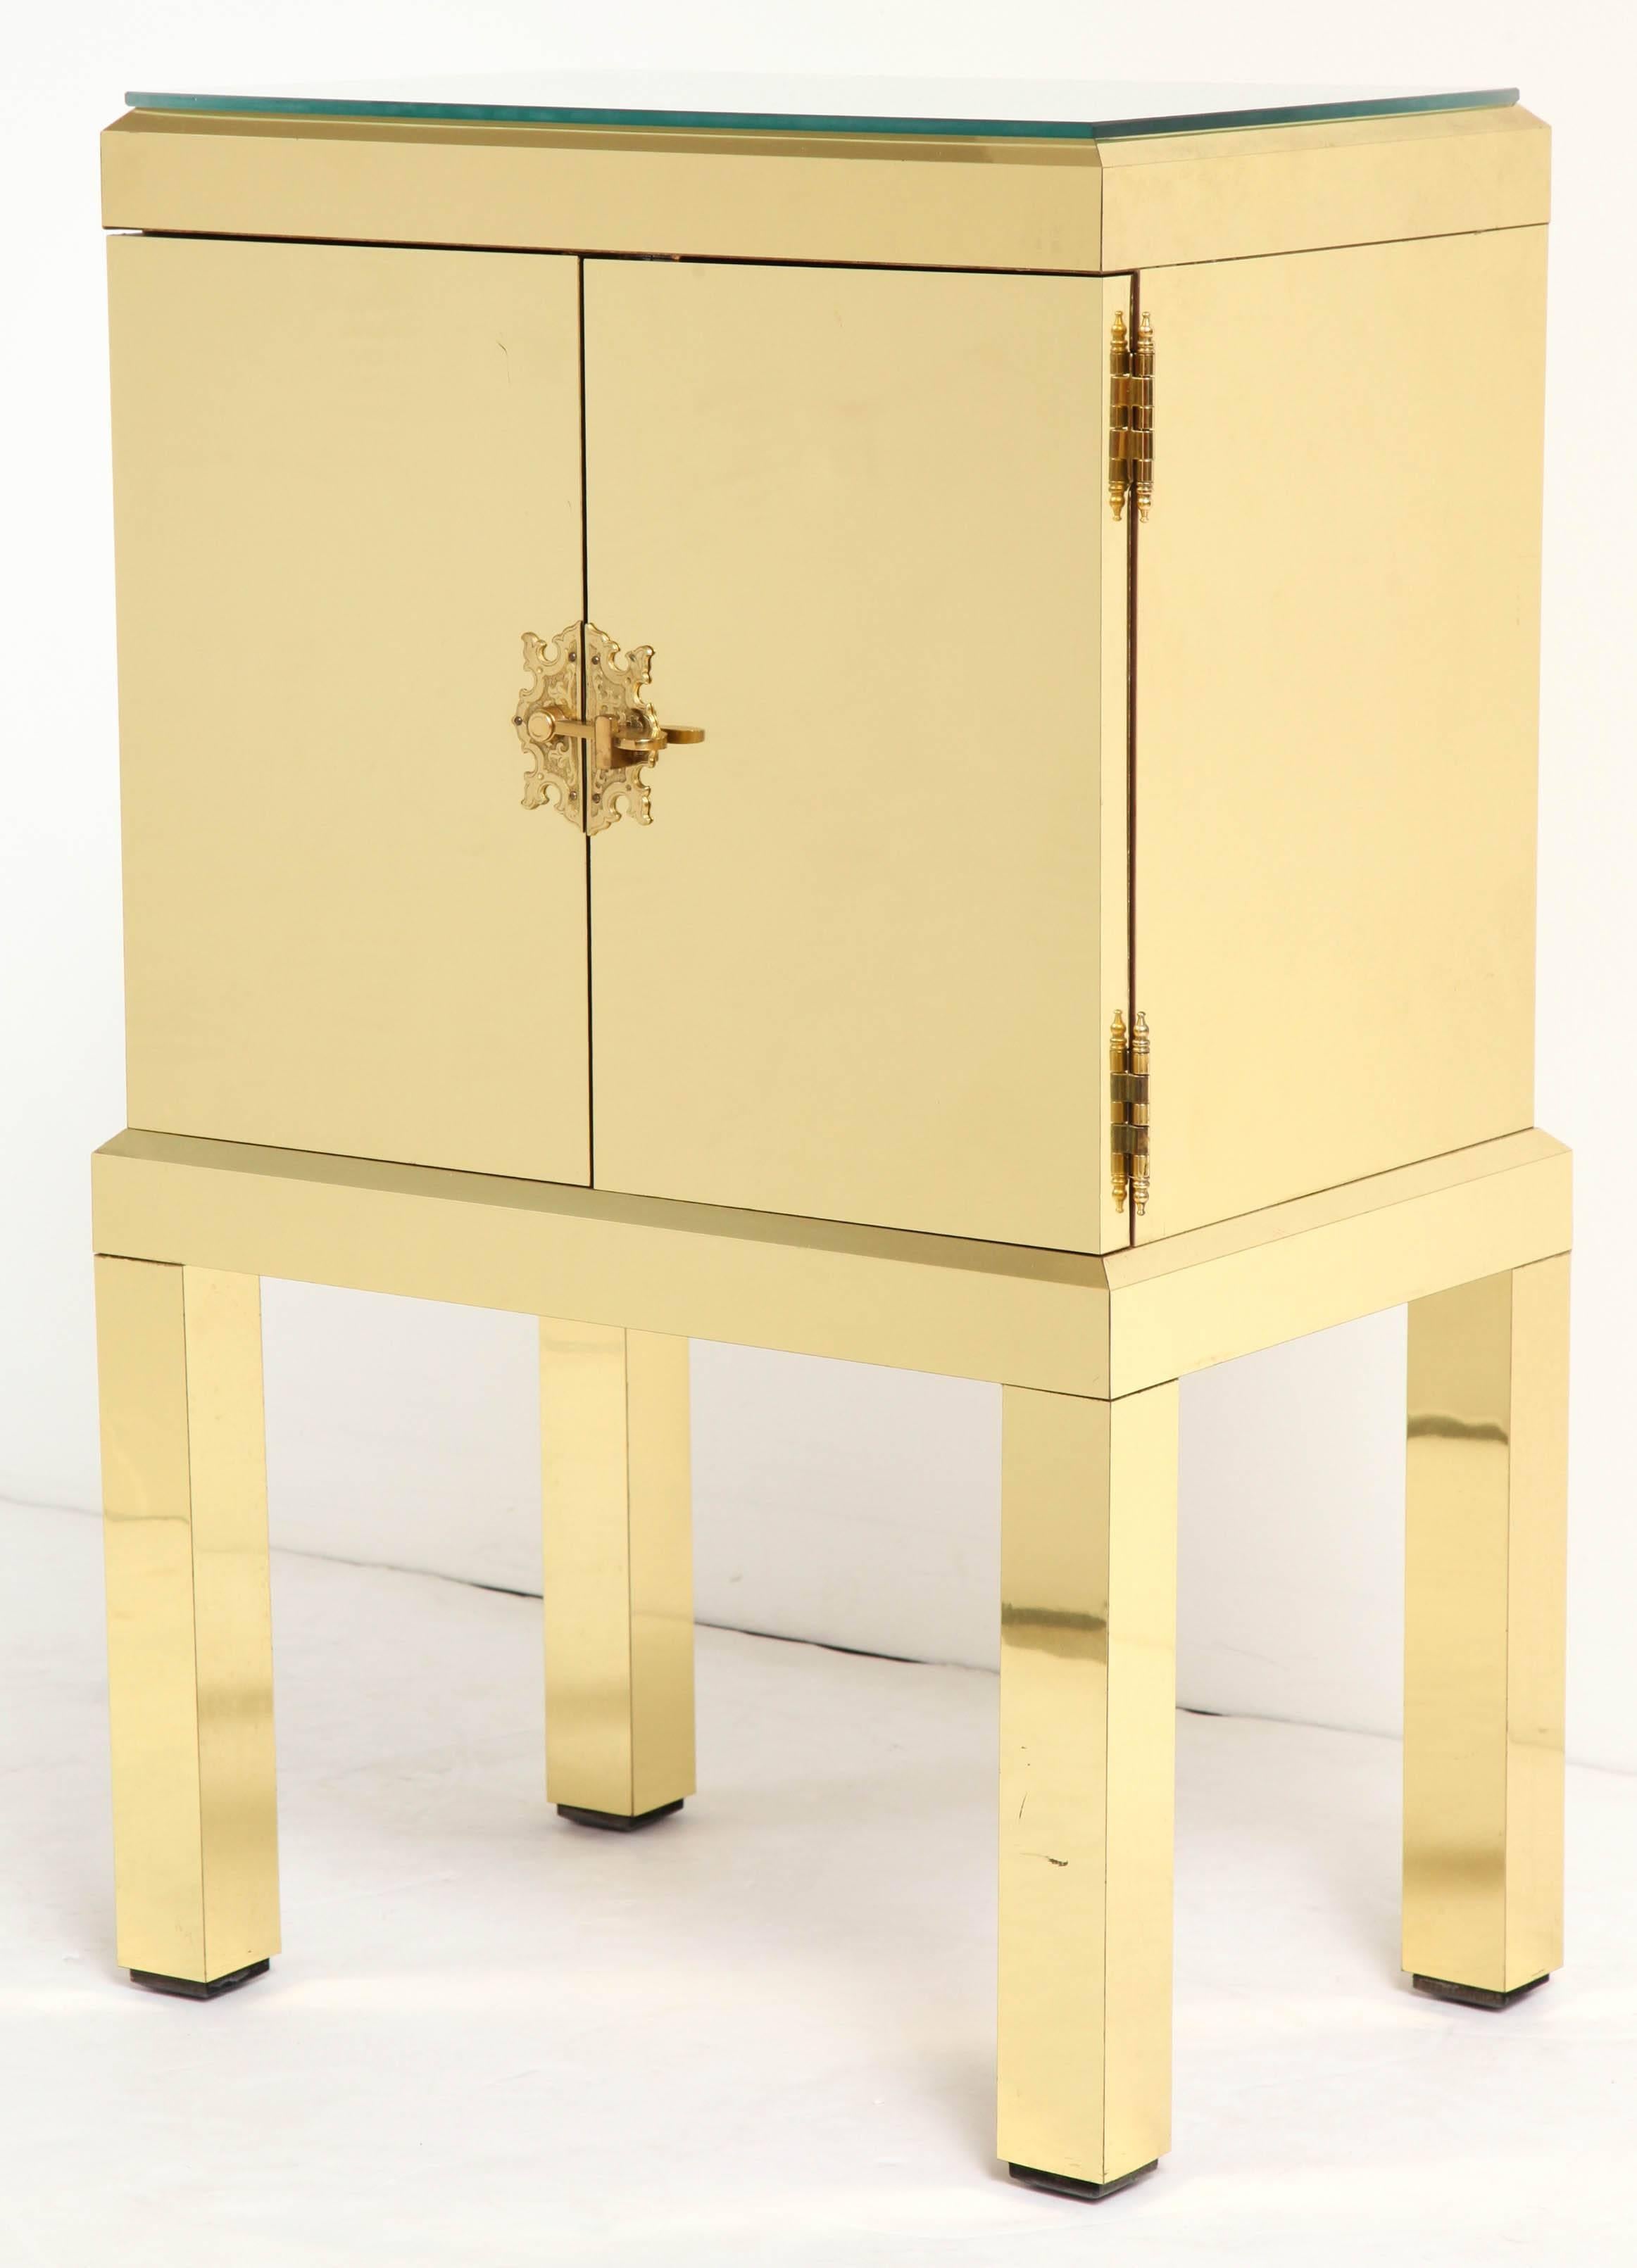 BG GALLERIES NEW YEAR SALE THROUGH FEBRUARY 29, 2024

Extremely stylish as well as functional two-door chest on four legs all clad in brass. Perfect for use as a telephone table or even as a single nightstand. Cut to fit glass top and a single